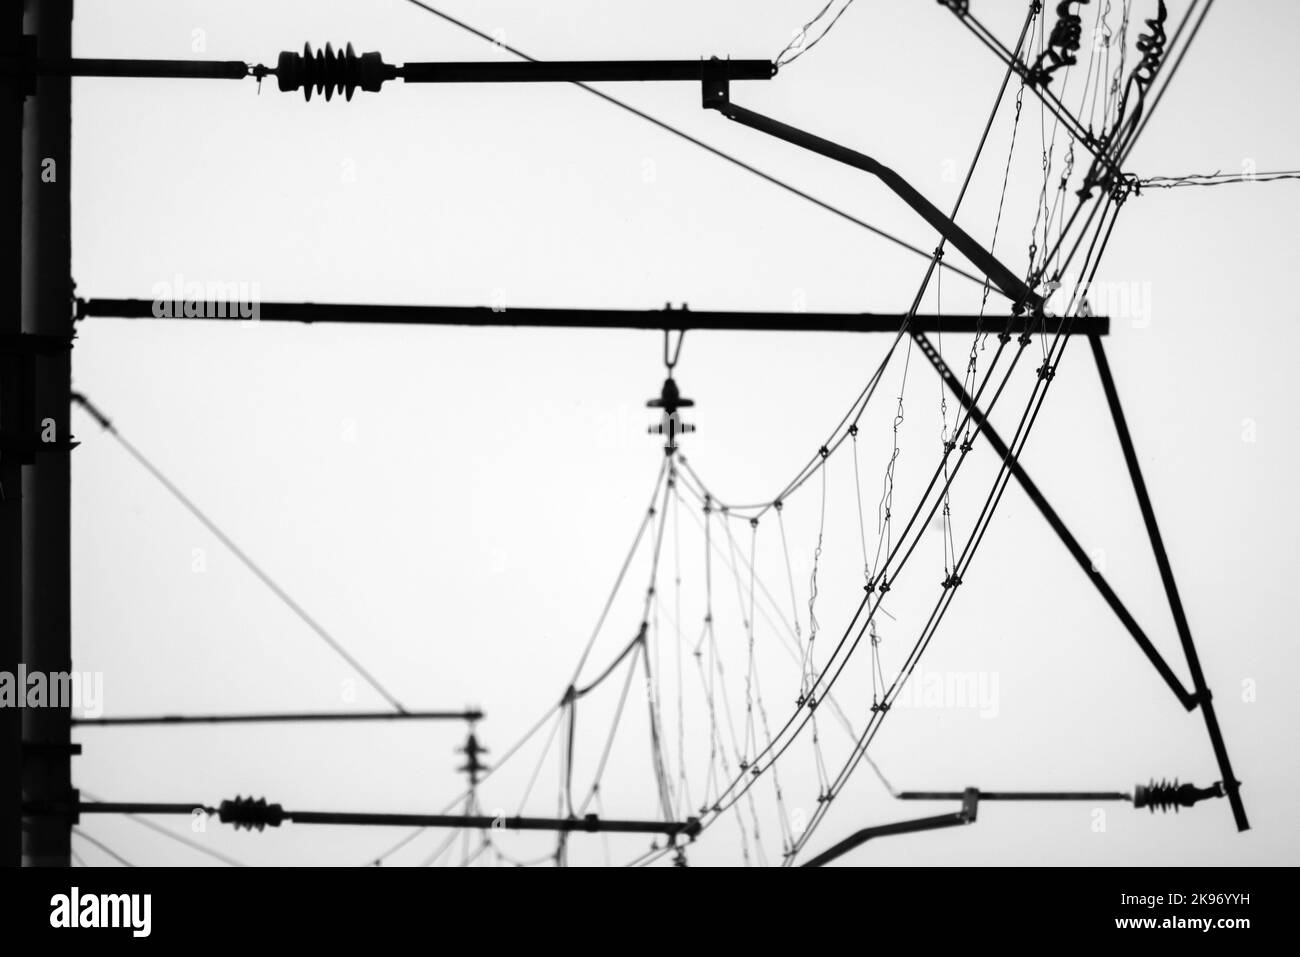 Overhead lines of a railway are under white sky, monochrome silhouette photo Stock Photo